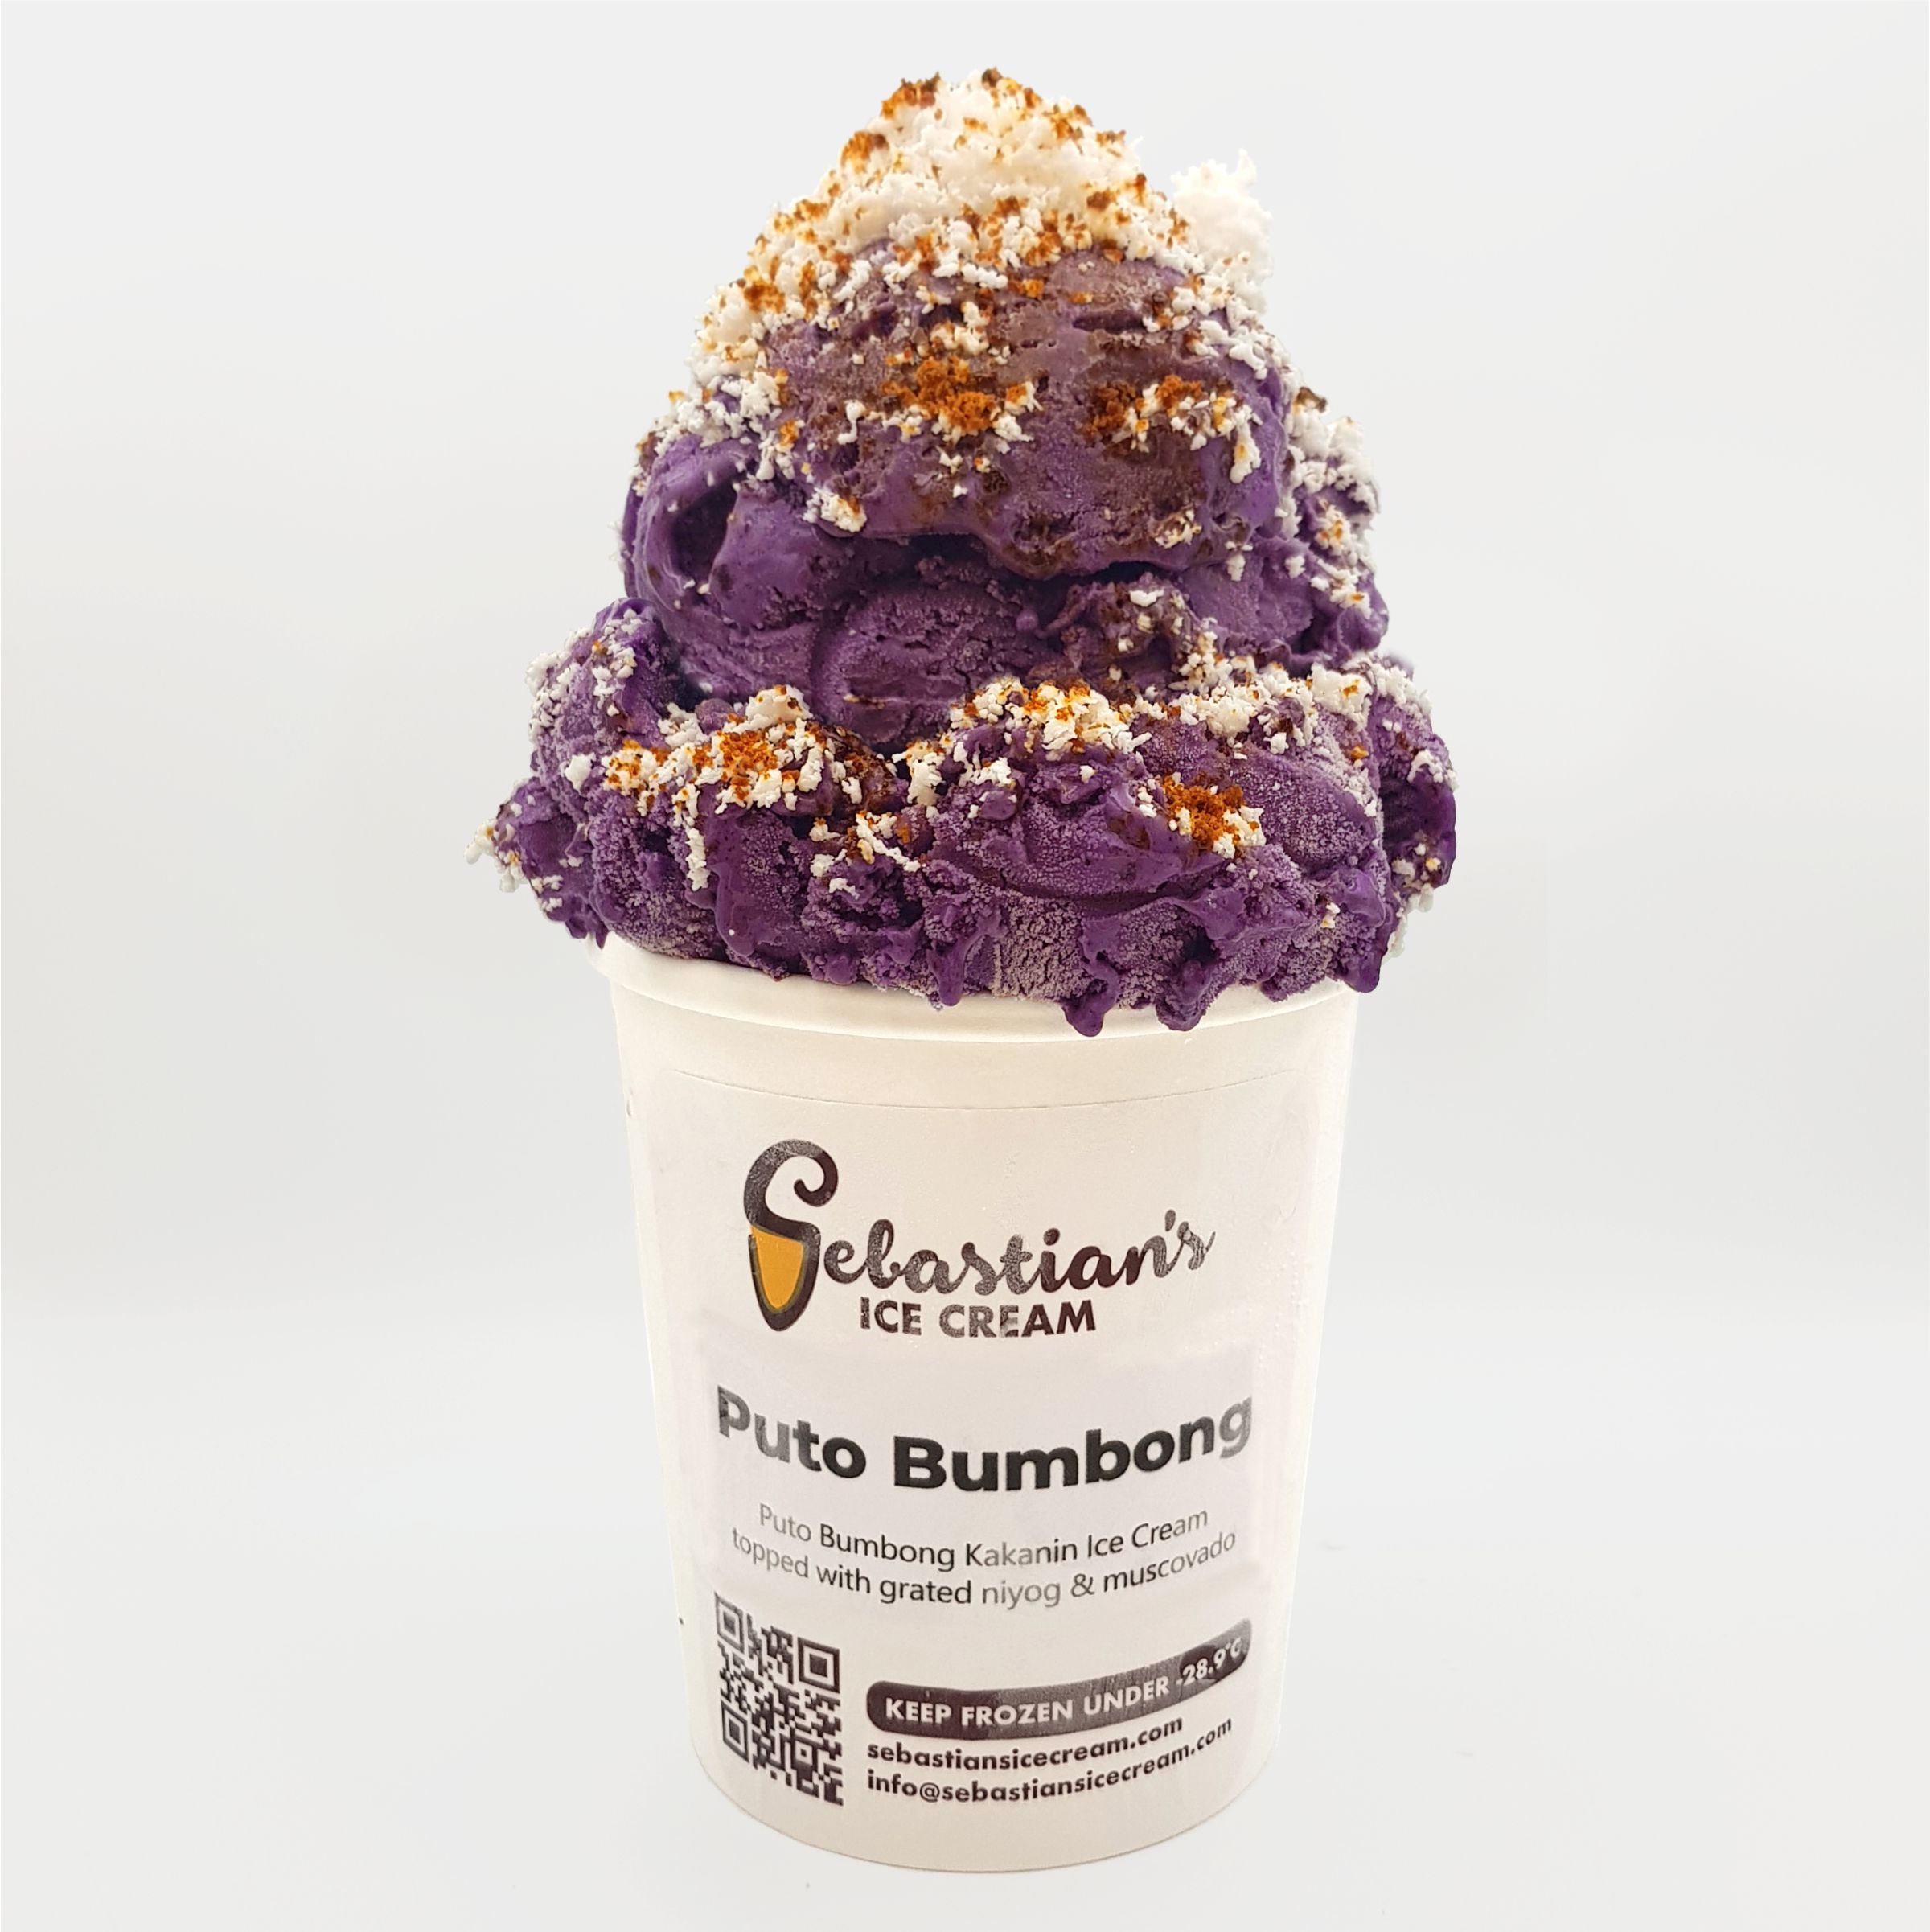 Get puto bumbong ice cream with the works from Sebastian’s